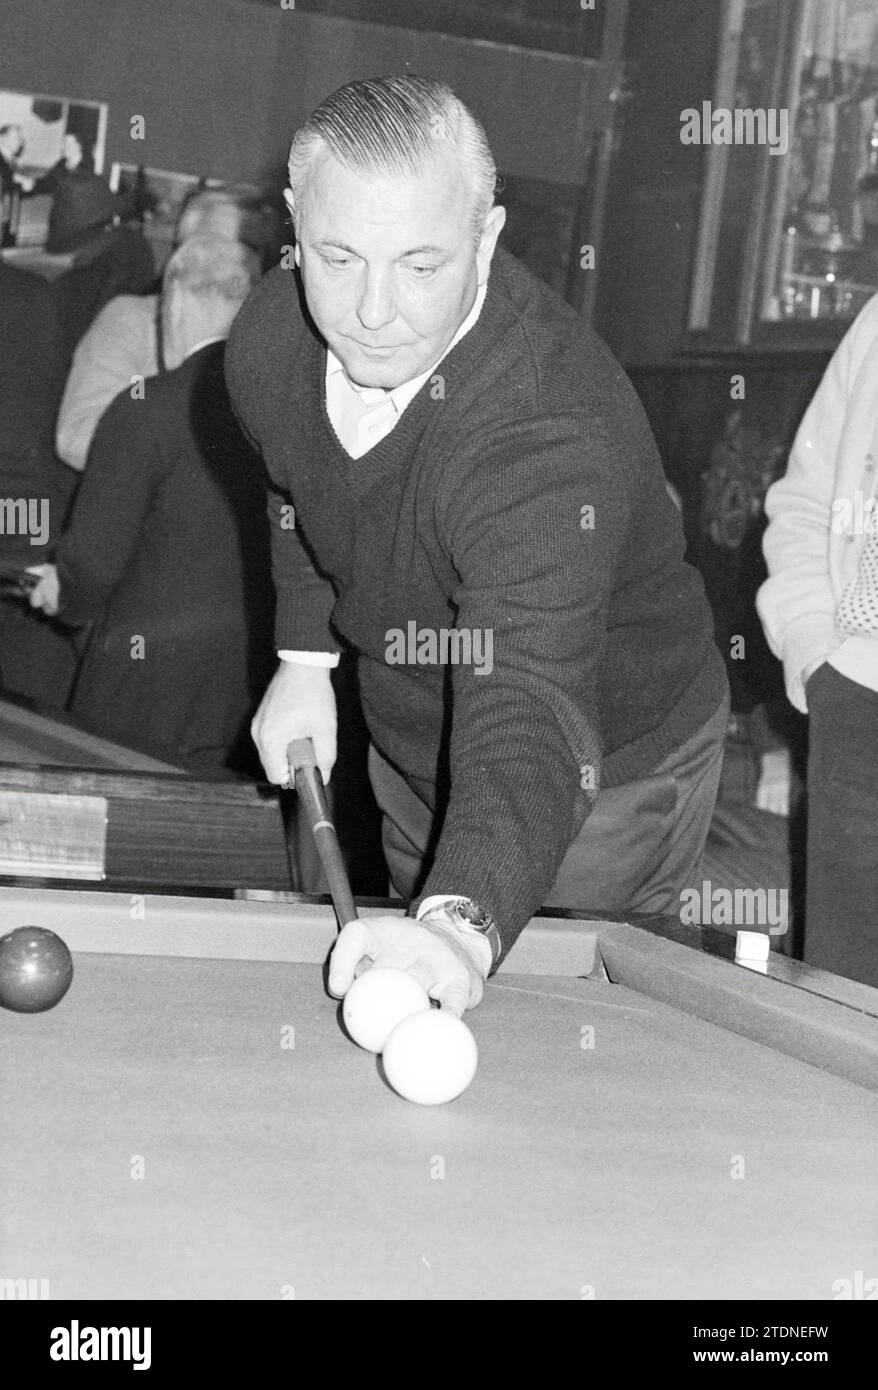 Billiards, 00-02-1980, Whizgle News from the Past, Tailored for the Future. Explore historical narratives, Dutch The Netherlands agency image with a modern perspective, bridging the gap between yesterday's events and tomorrow's insights. A timeless journey shaping the stories that shape our future Stock Photo